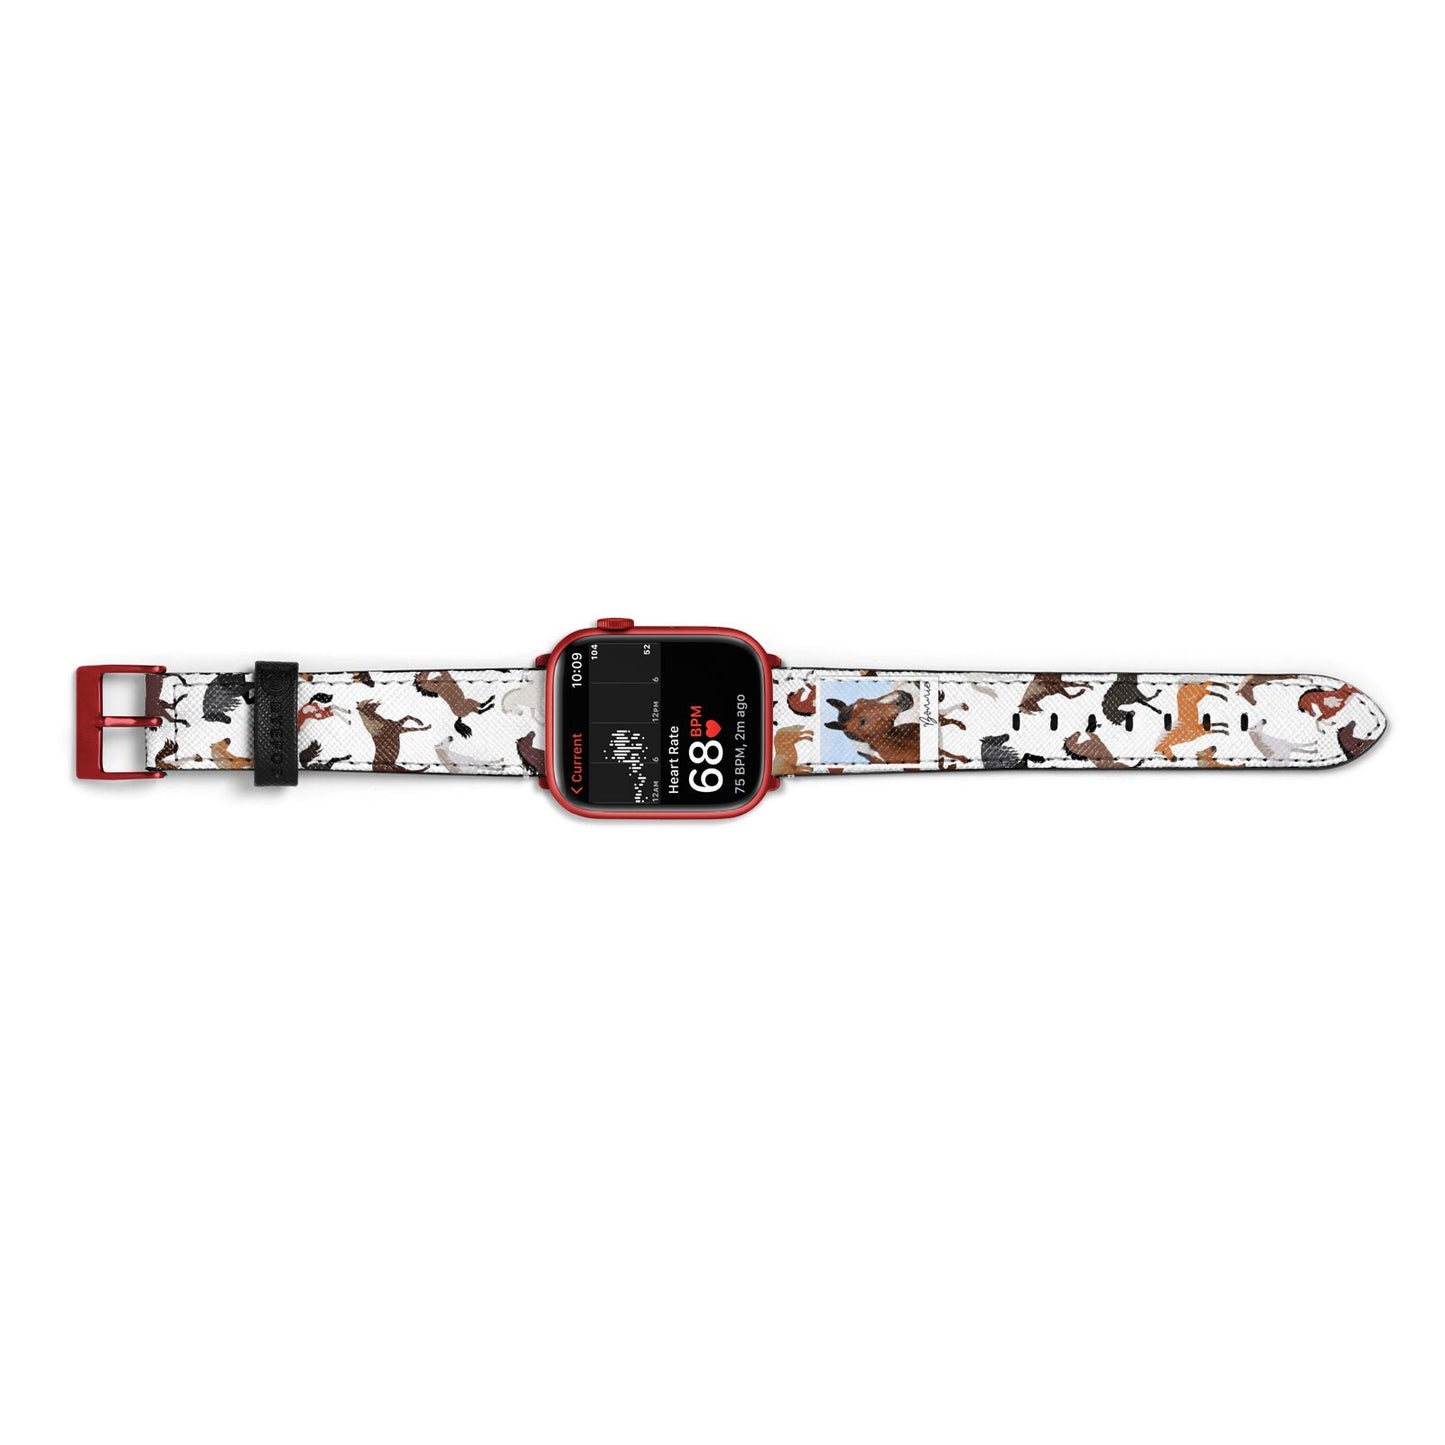 Personalised Horse Photo Apple Watch Strap Size 38mm Landscape Image Red Hardware